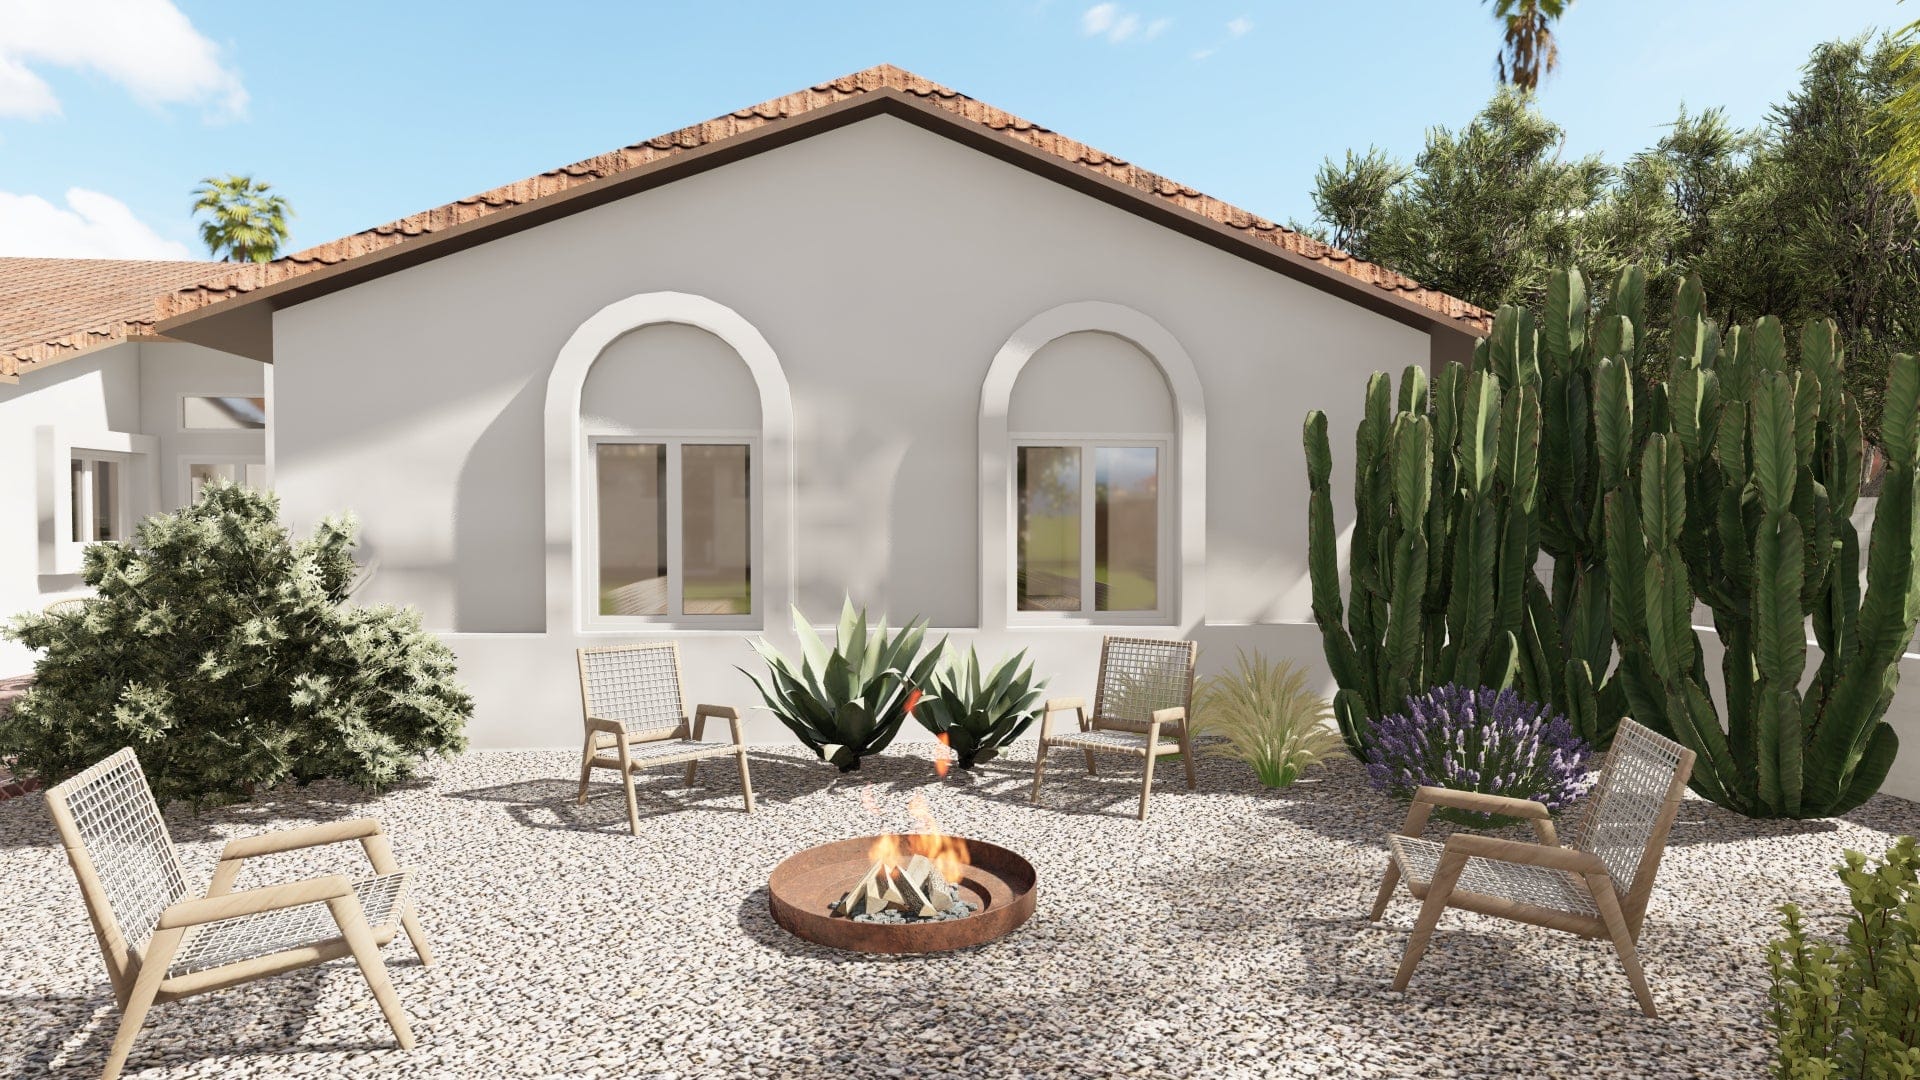 3D design render of gravel patio and fire pit seating area